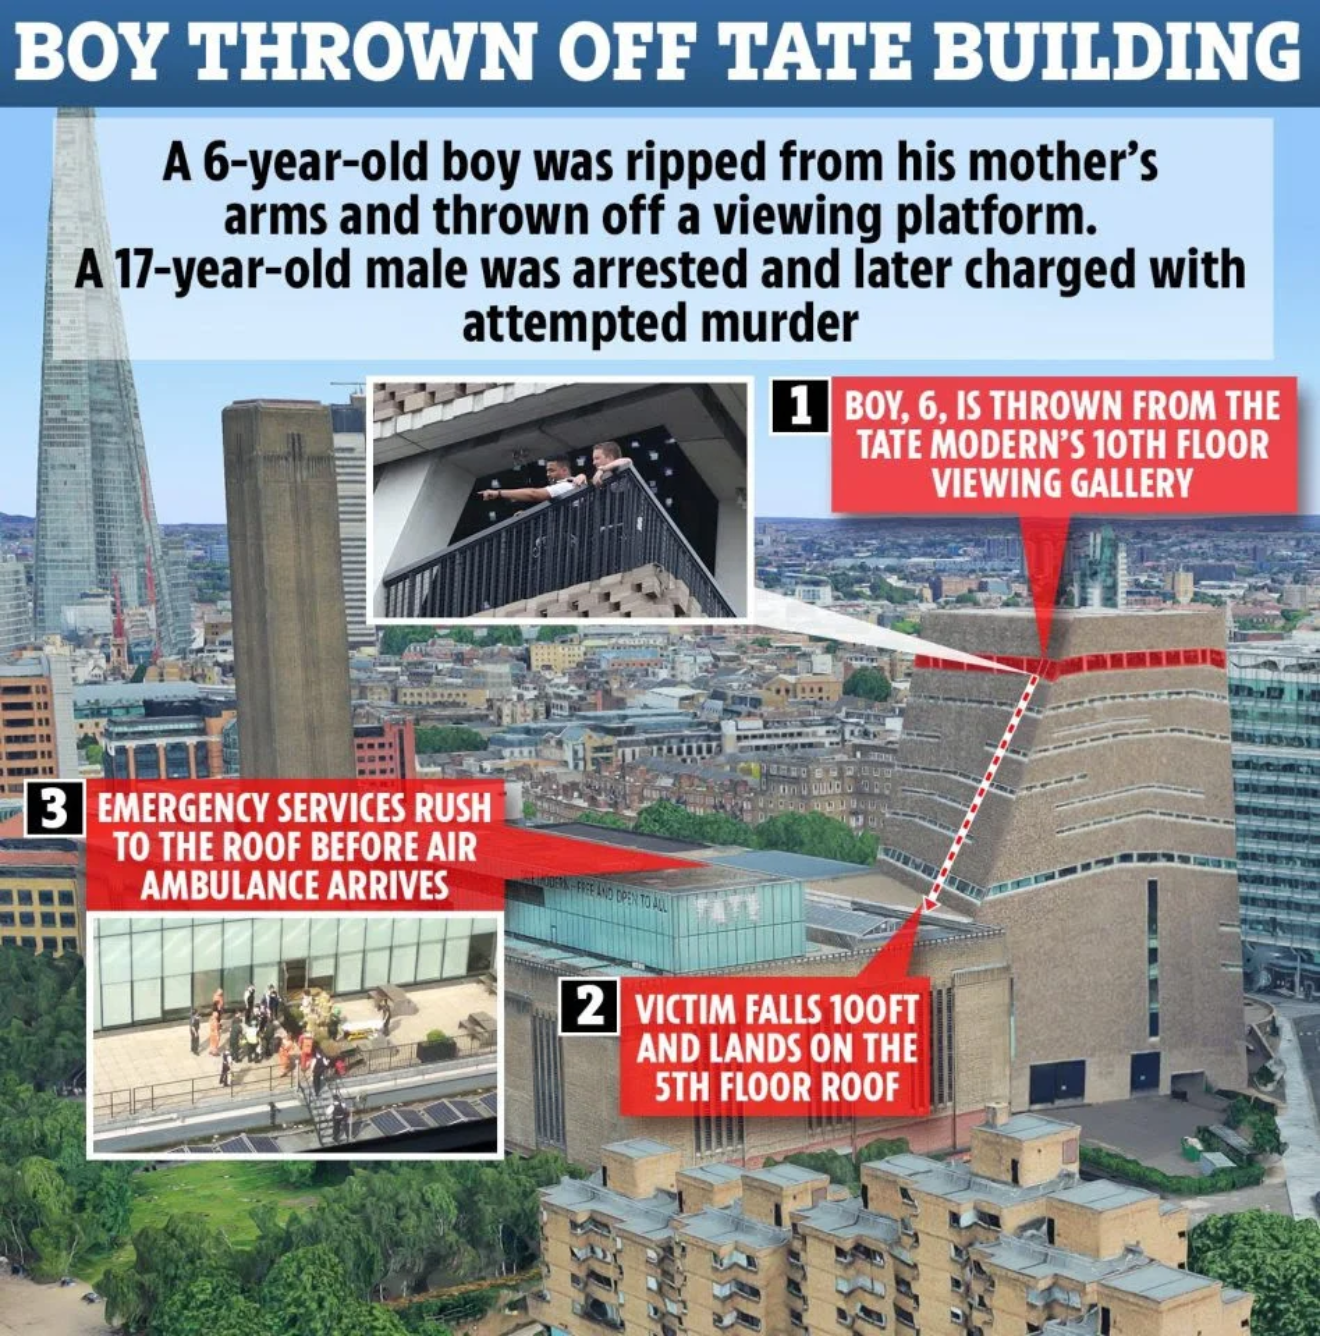 tate modern 6 year old - Boy Thrown Off Tate Building A 6yearold boy was ripped from his mother's arms and thrown off a viewing platform. A 17yearold male was arrested and later charged with attempted murder Boy, 6, Is Thrown From The Tate Modern'S 10TH F